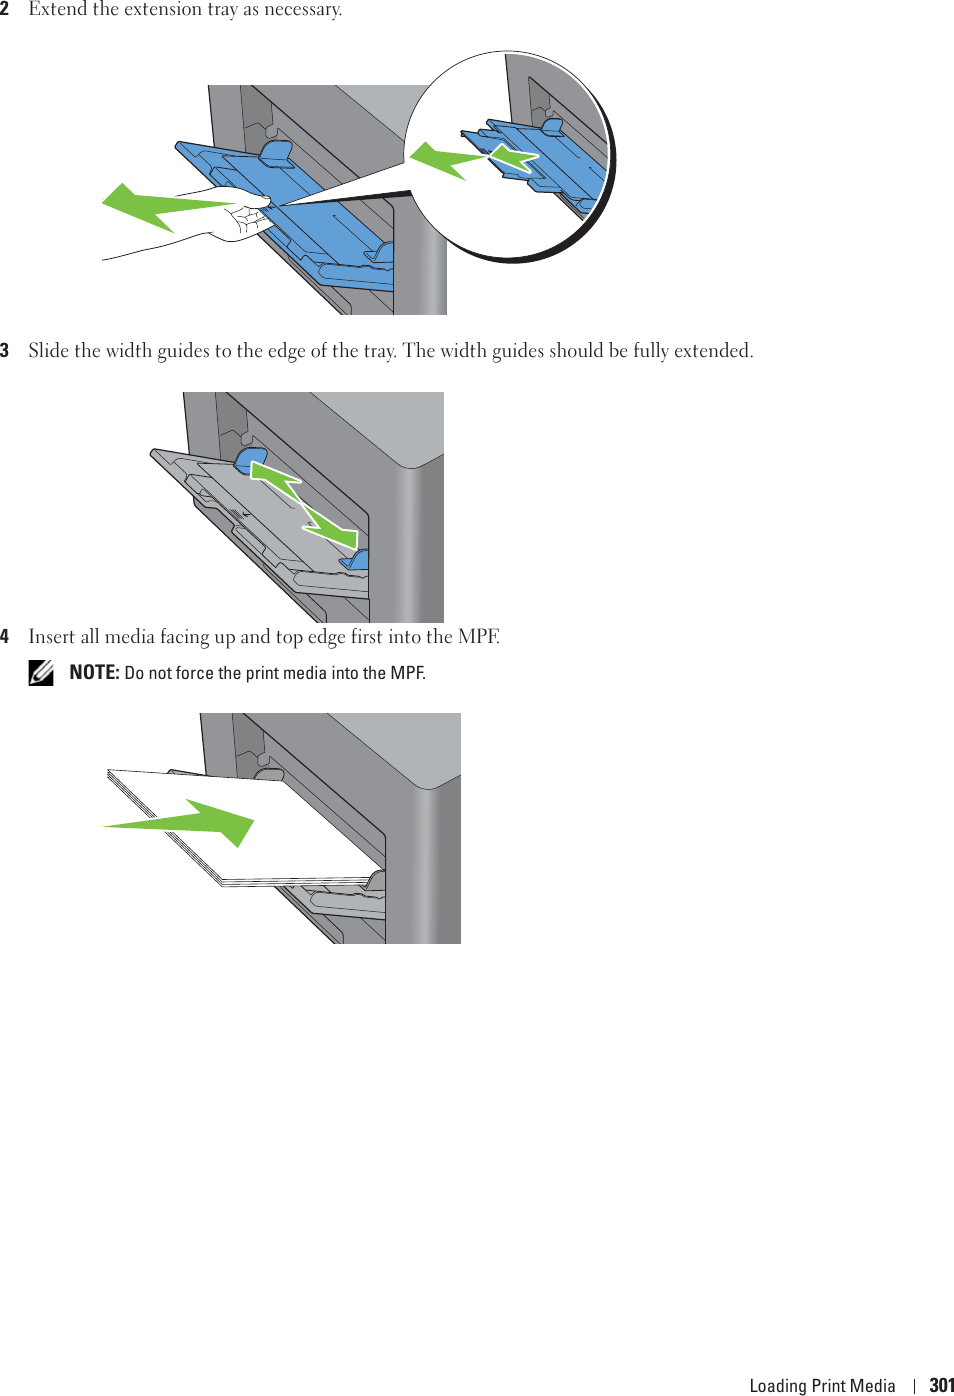 Loading Print Media 3012Extend the extension tray as necessary.3Slide the width guides to the edge of the tray. The width guides should be fully extended.4Insert all media facing up and top edge first into the MPF. NOTE: Do not force the print media into the MPF.